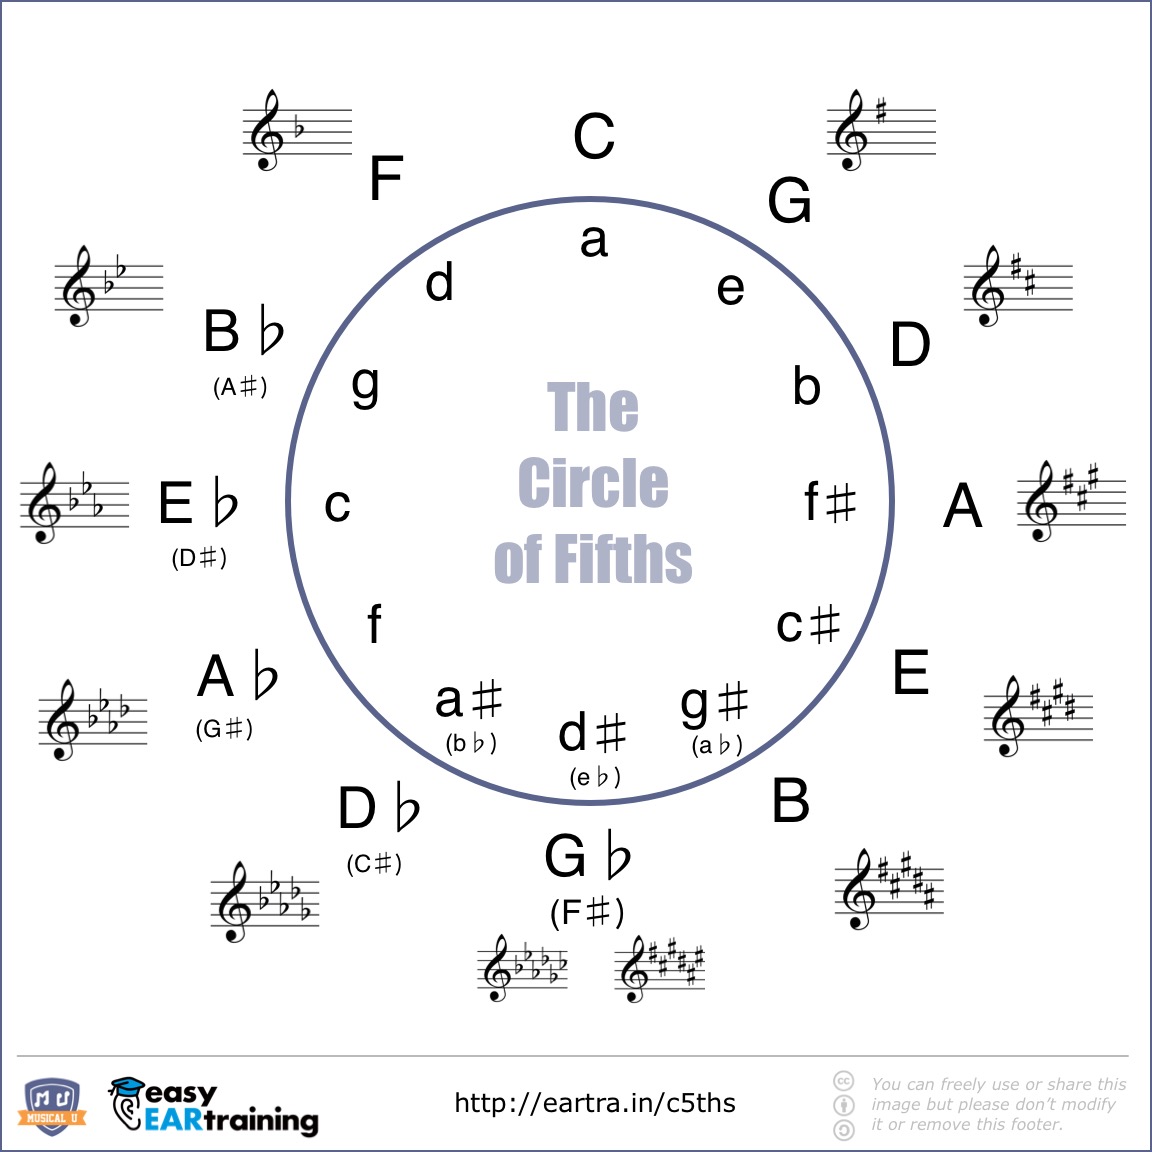 The Circle of Fifths - Full